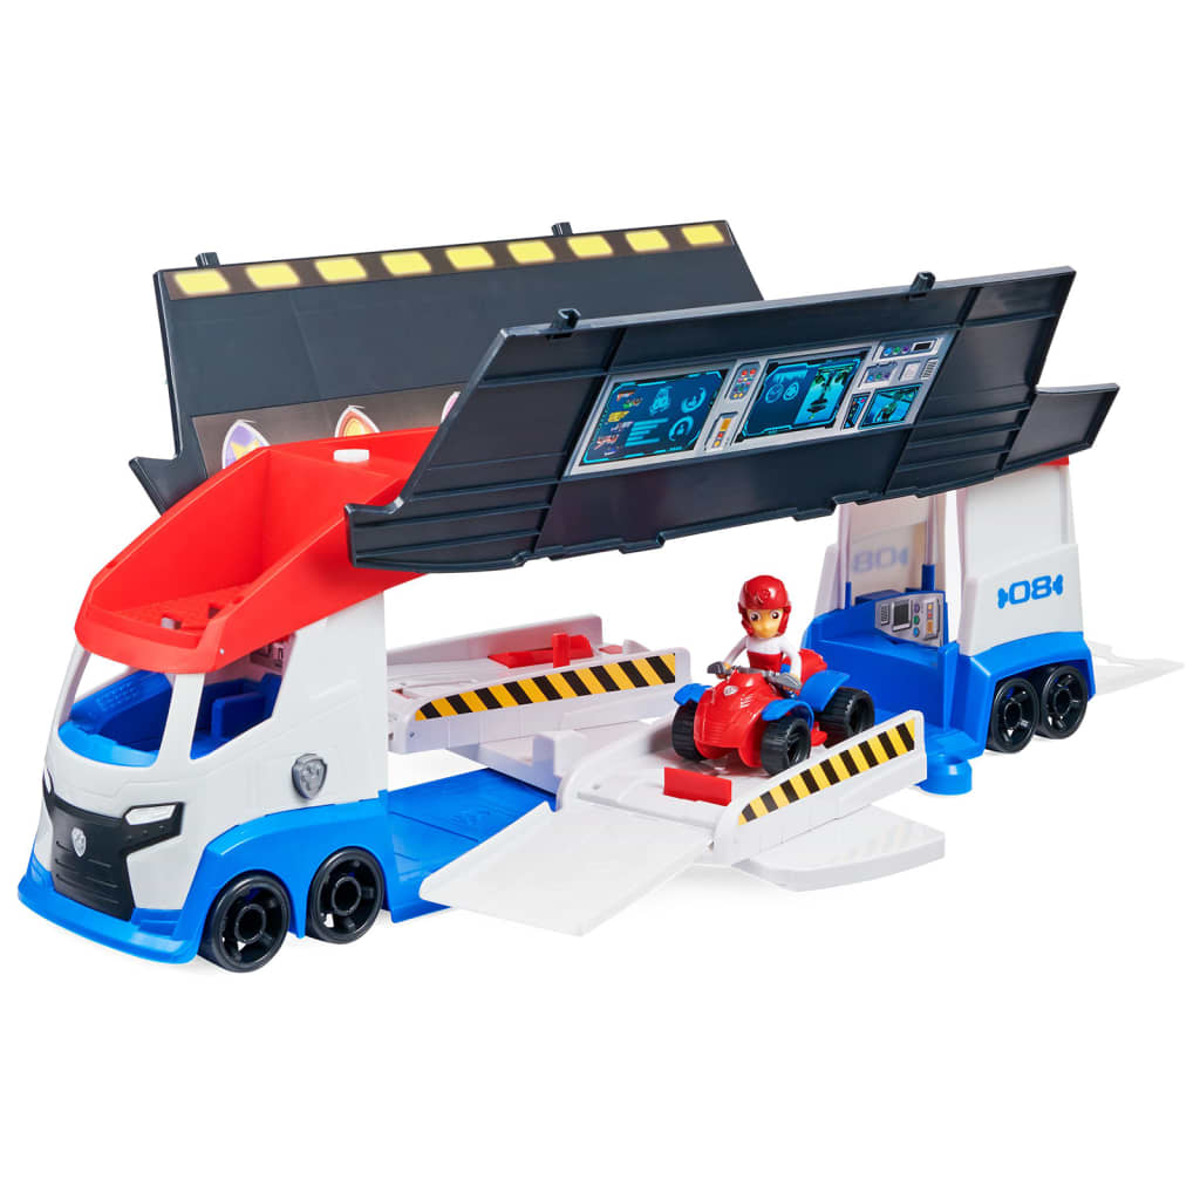 SPIN MASTER 33143 2.0 Spielset PAW PAW PATROLLER